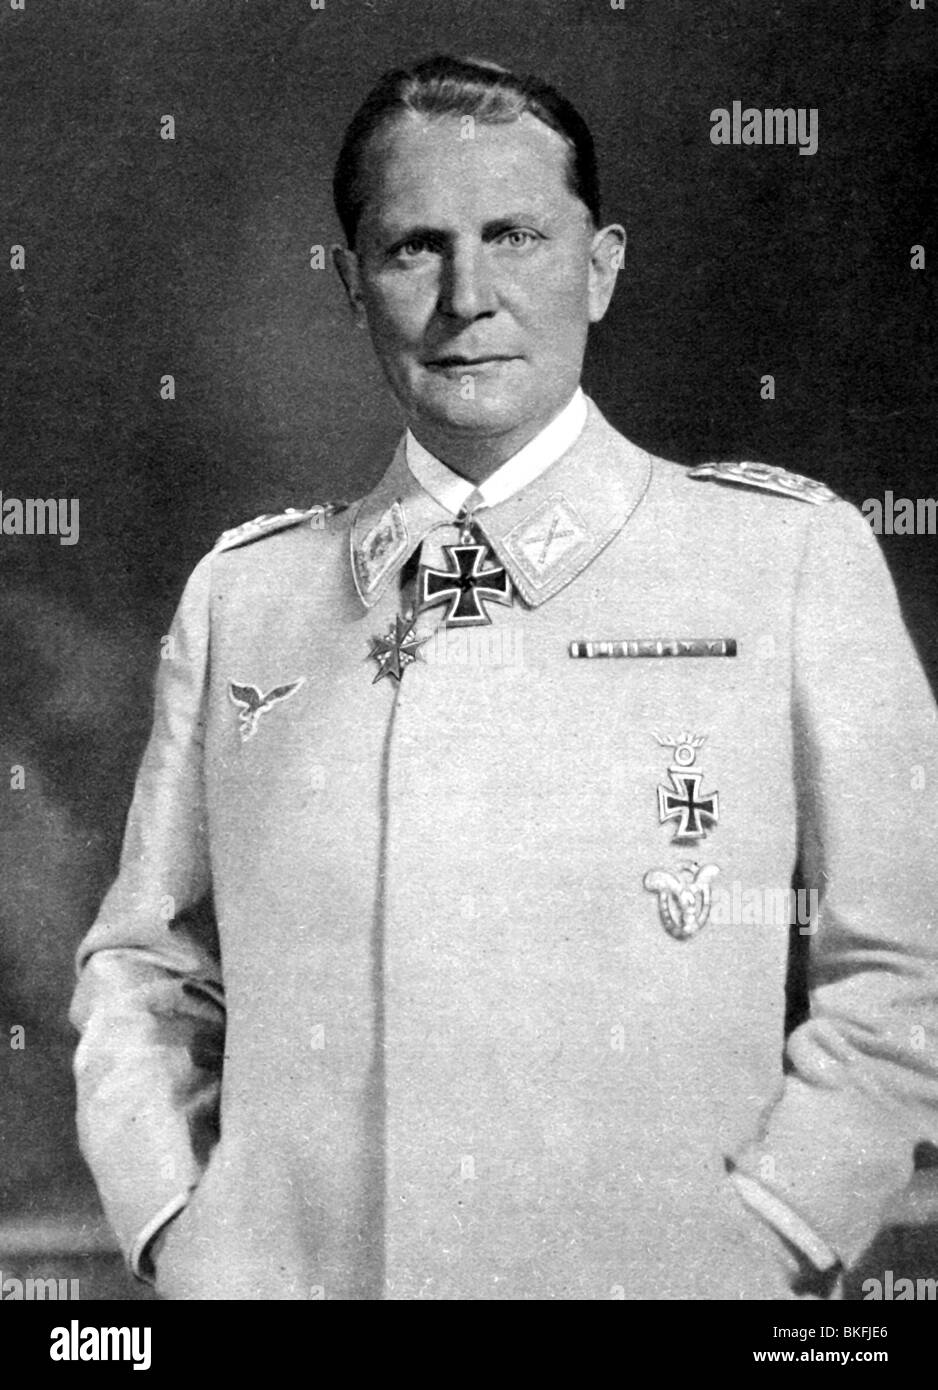 Goering, Hermann, 12.1.1893 - 15.10.1946, German politician (NSDAP), Reich Marshal, commander-in-chief of the Luftwaffe, half length, in uniform, circa 1940, Stock Photo